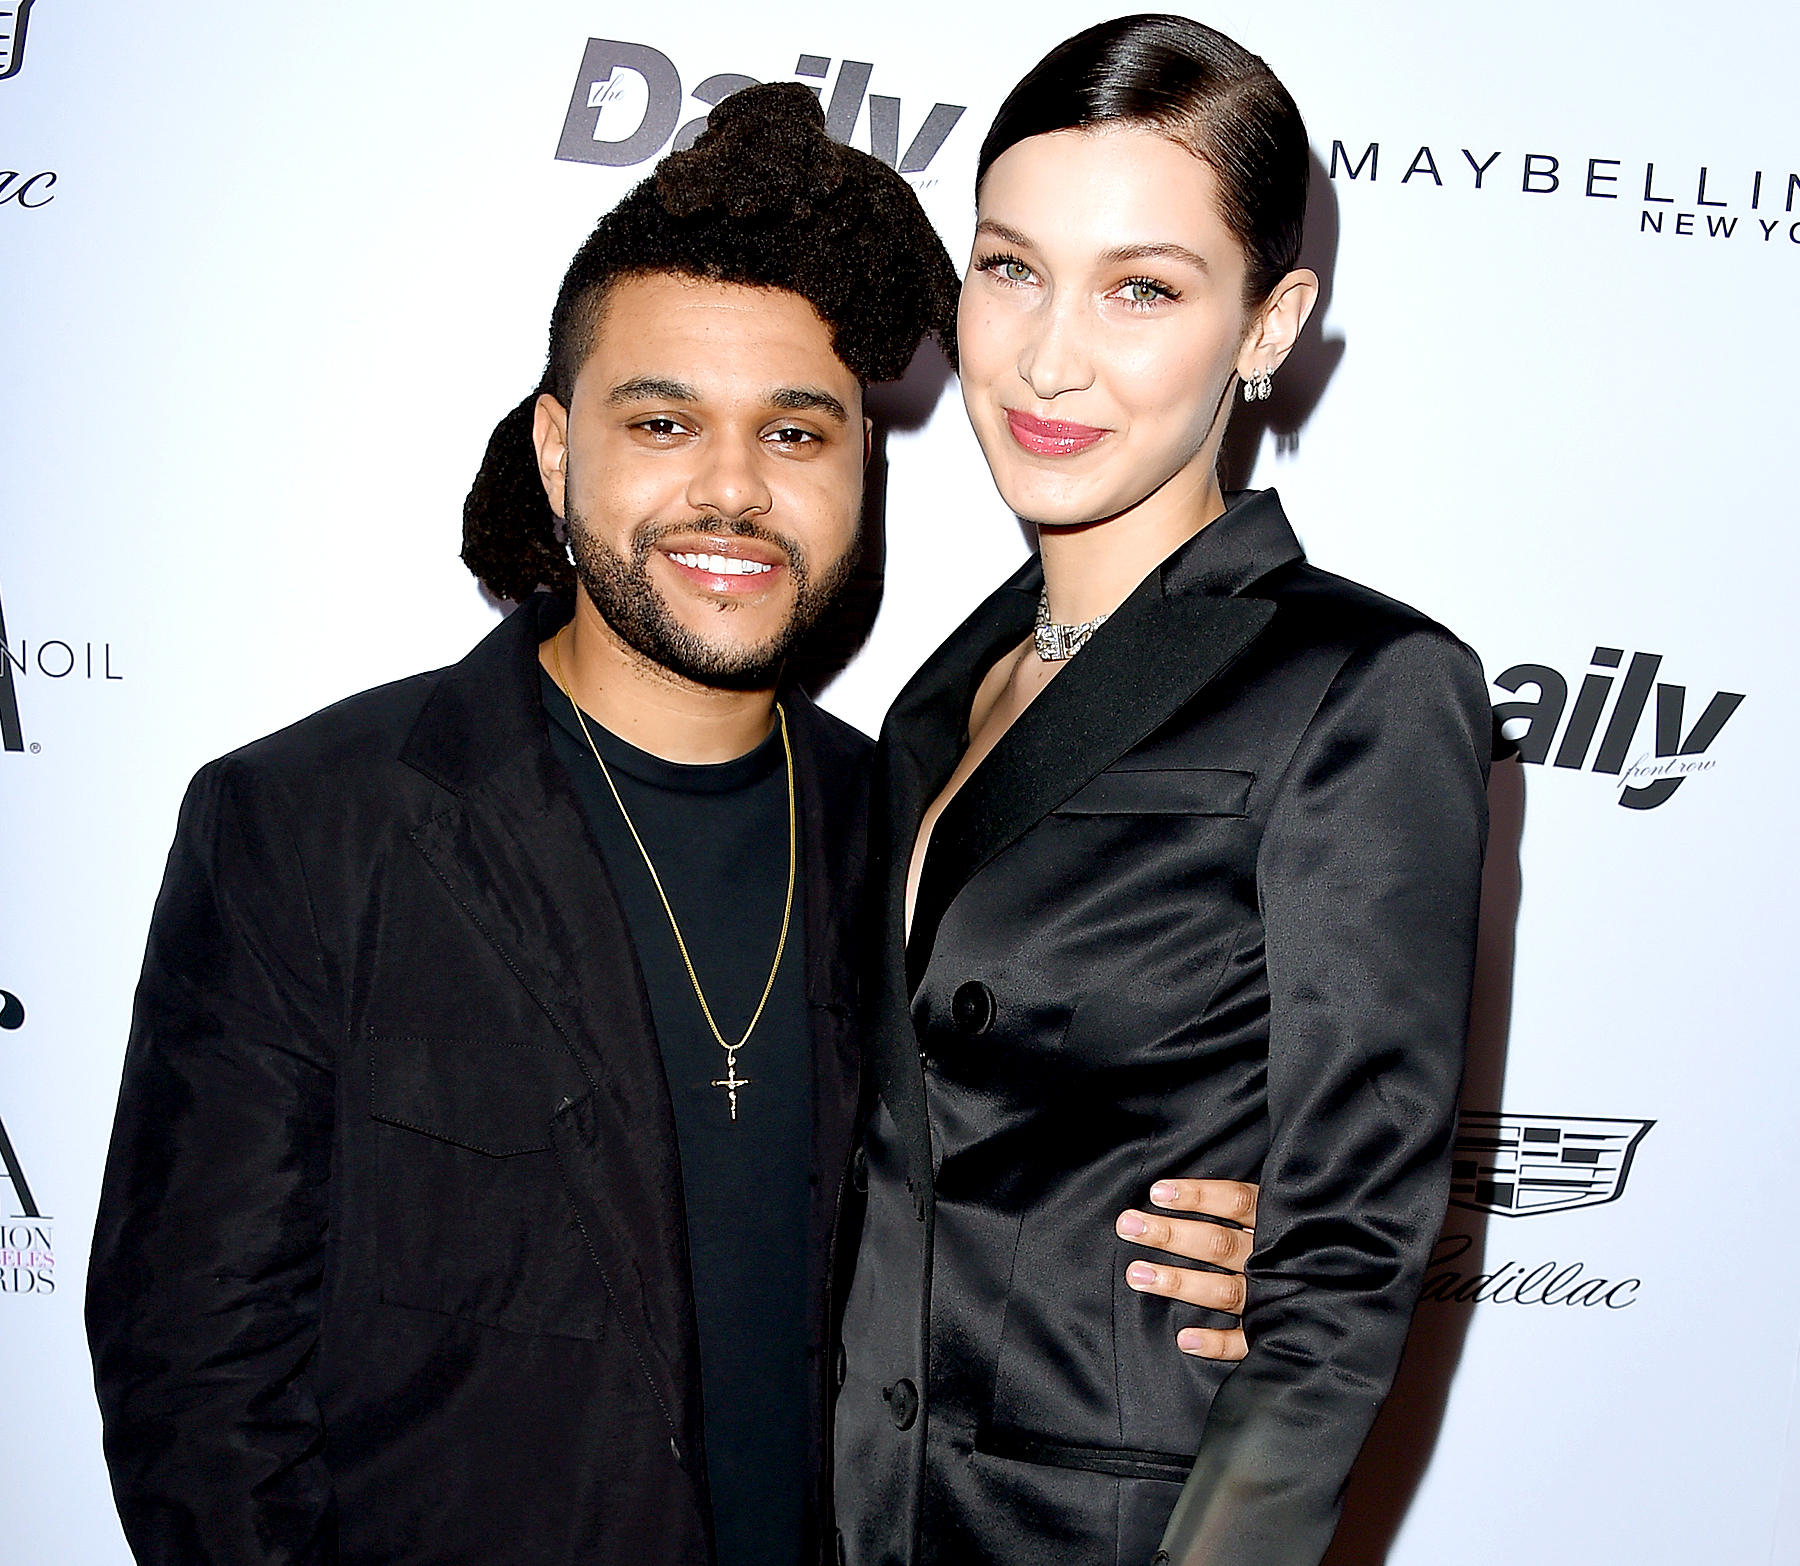 Bella Hadid and The Weeknd in Miami Together December 2015